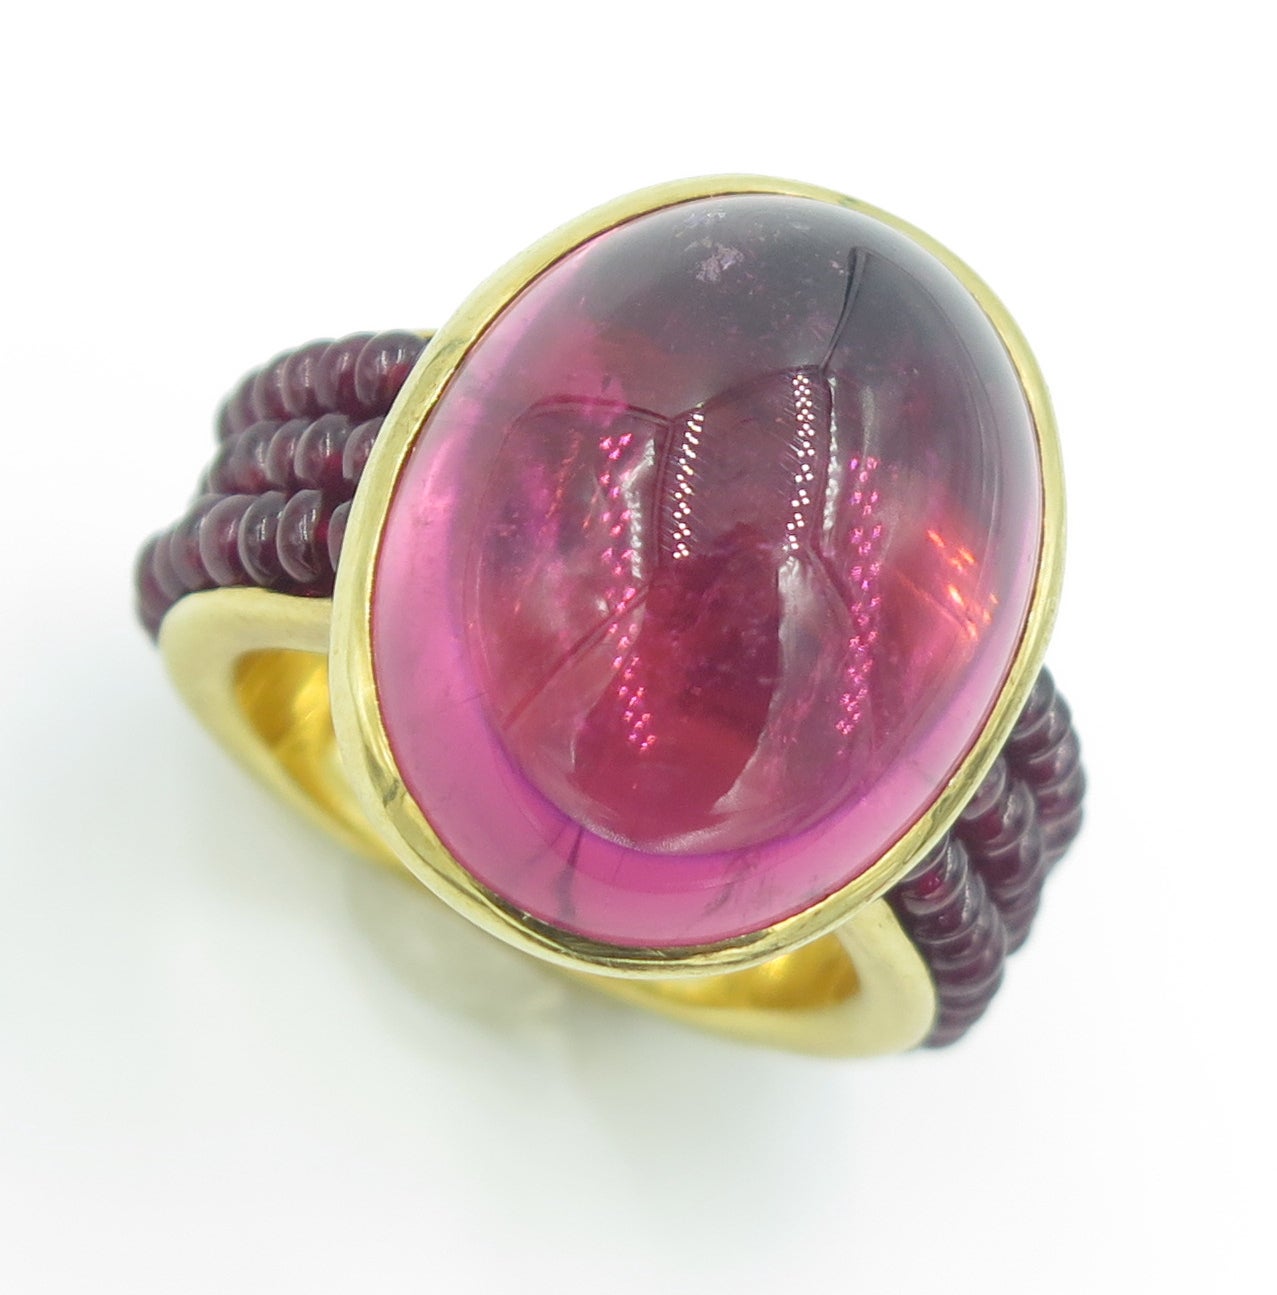 An 18 karat yellow gold, pink tourmaline and ruby bead ring, McTeigue & McClelland.  The ring is collet set with an oval cabochon pink tourmaline weighing approximately 21.6 carats.  The shoulders are each set with 3 strands of ruby beads.  The ring